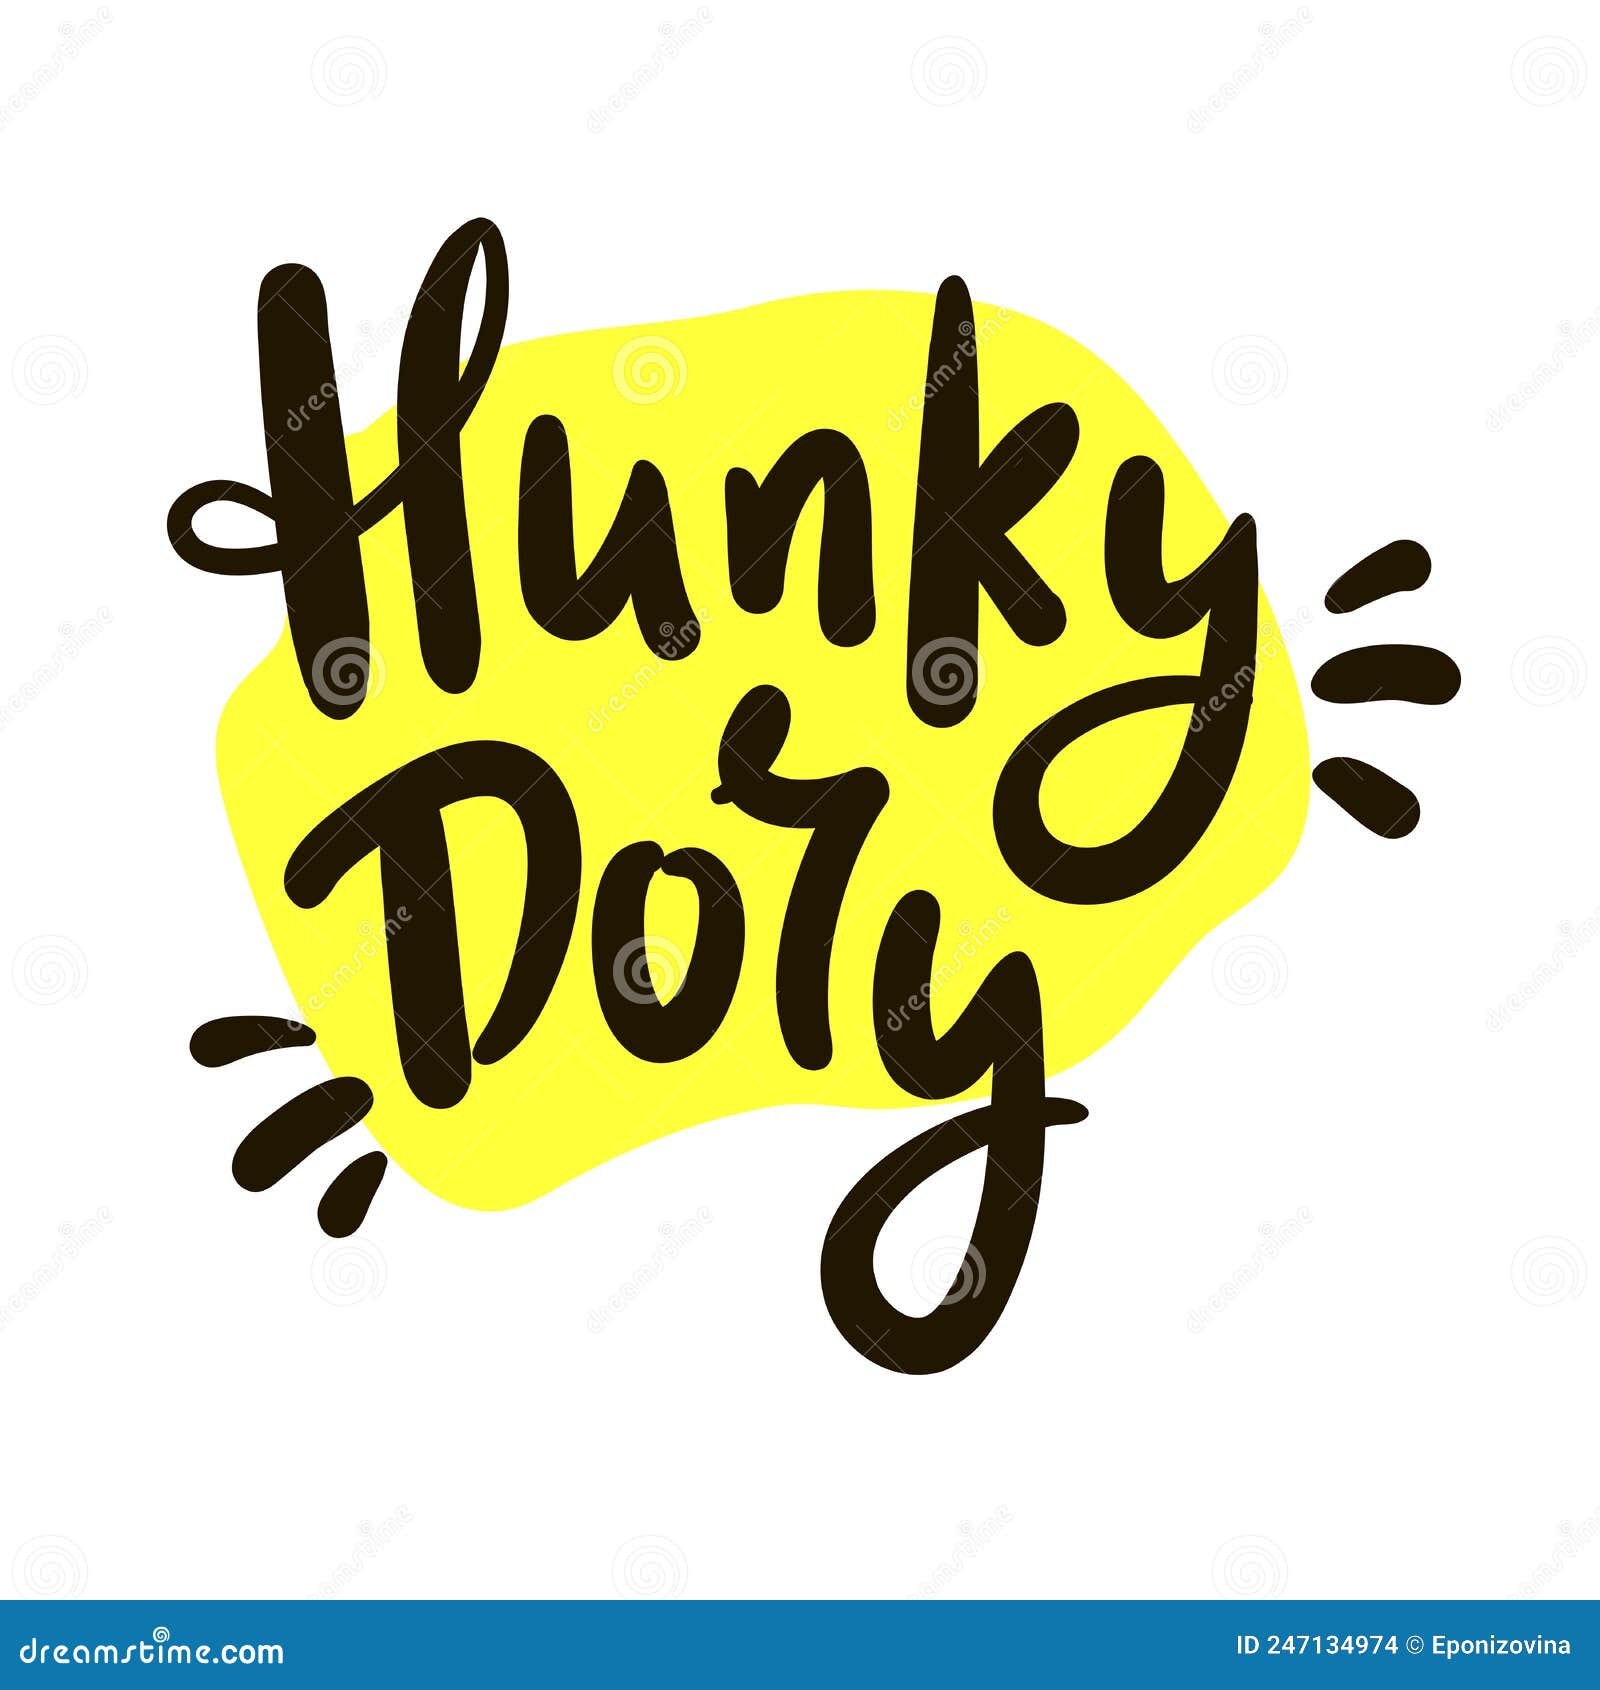 hunky-dory - simple funny inspire motivational quote.